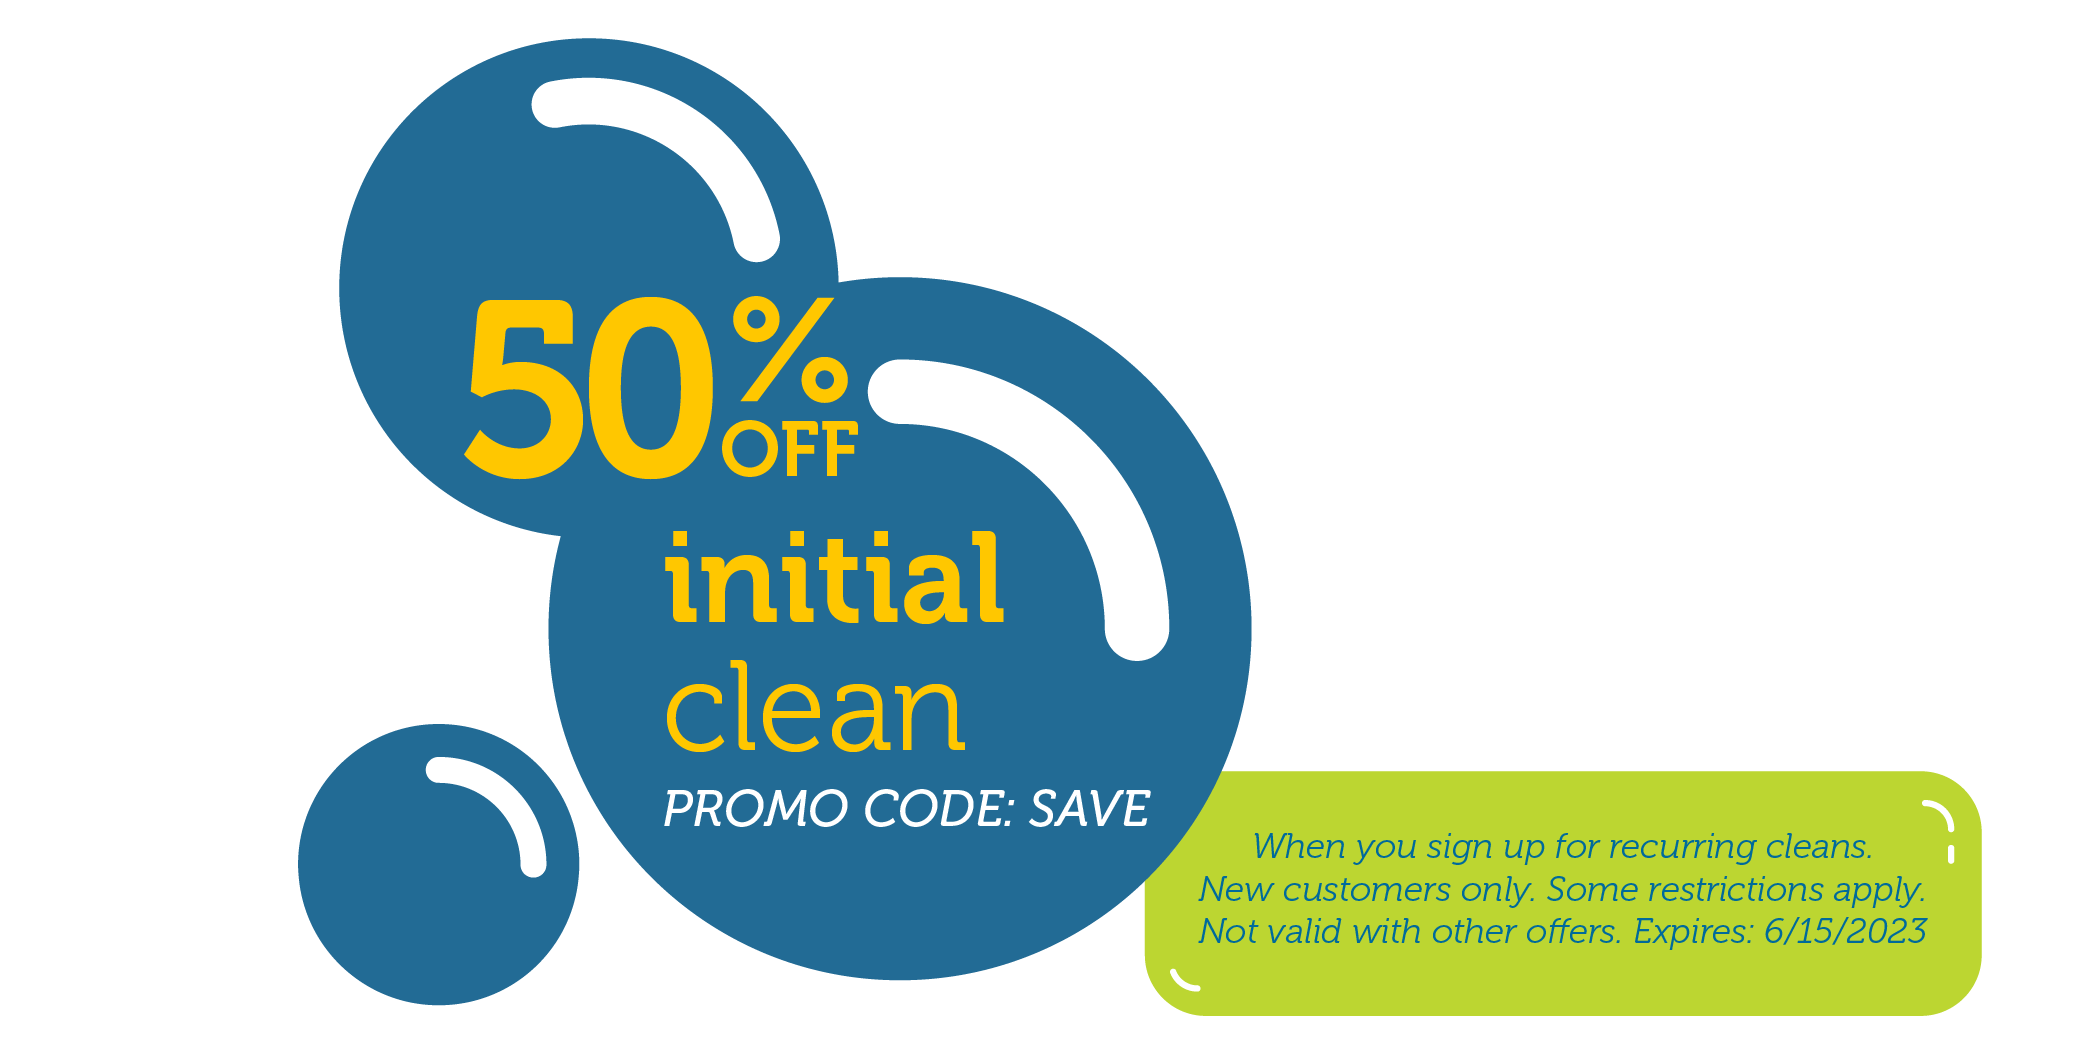 Coupon for 50% off initial home cleaning service